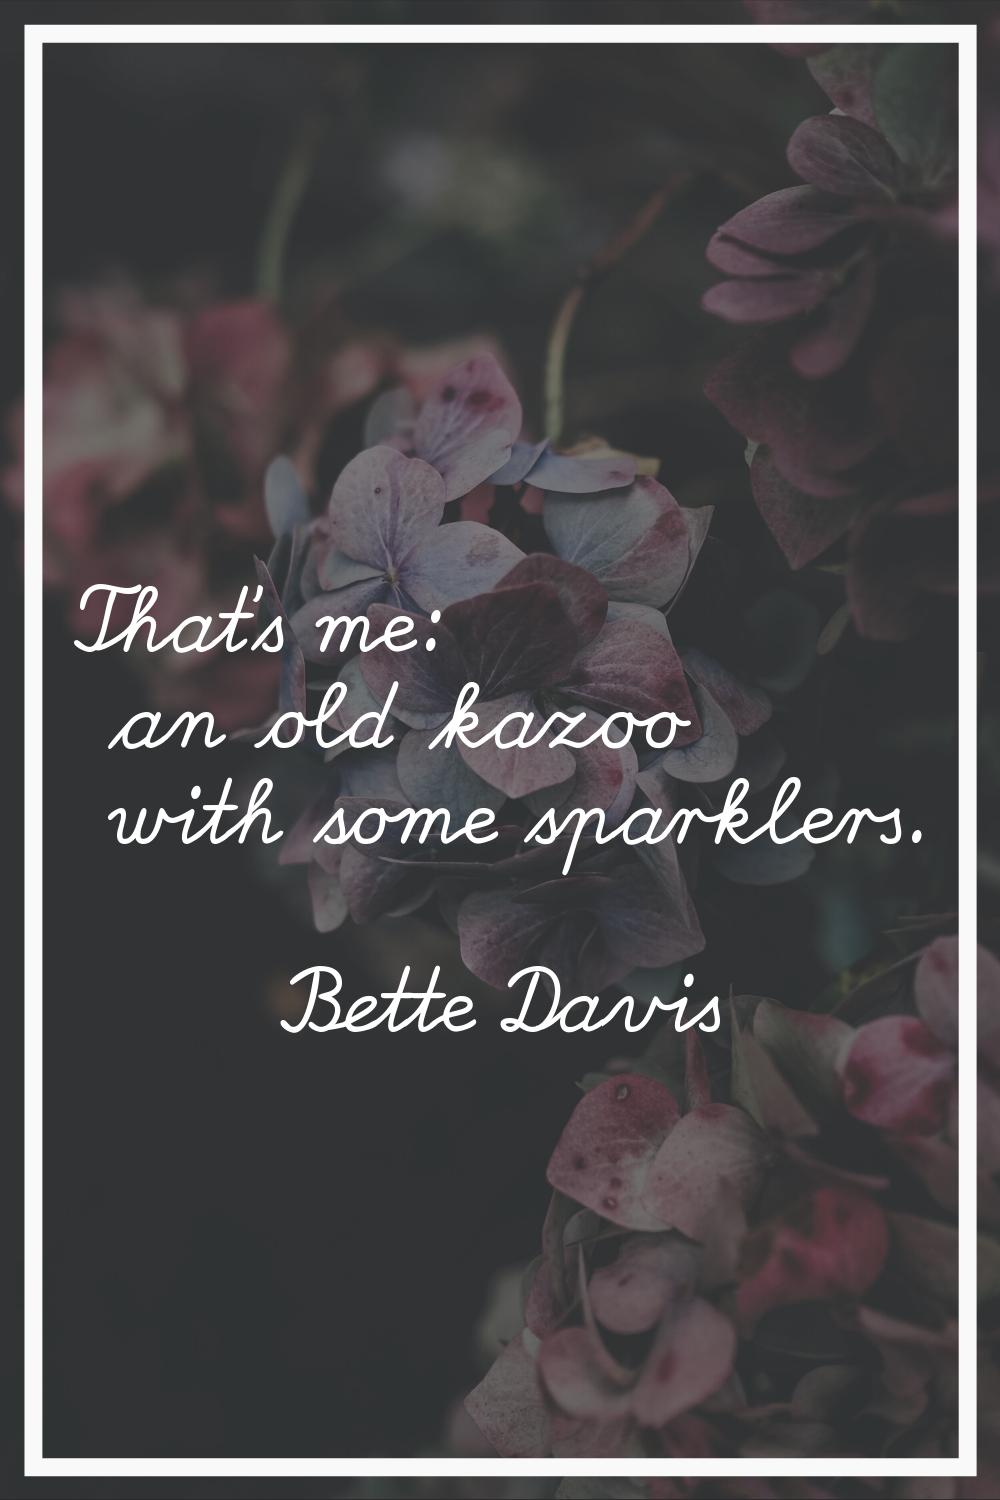 That's me: an old kazoo with some sparklers.